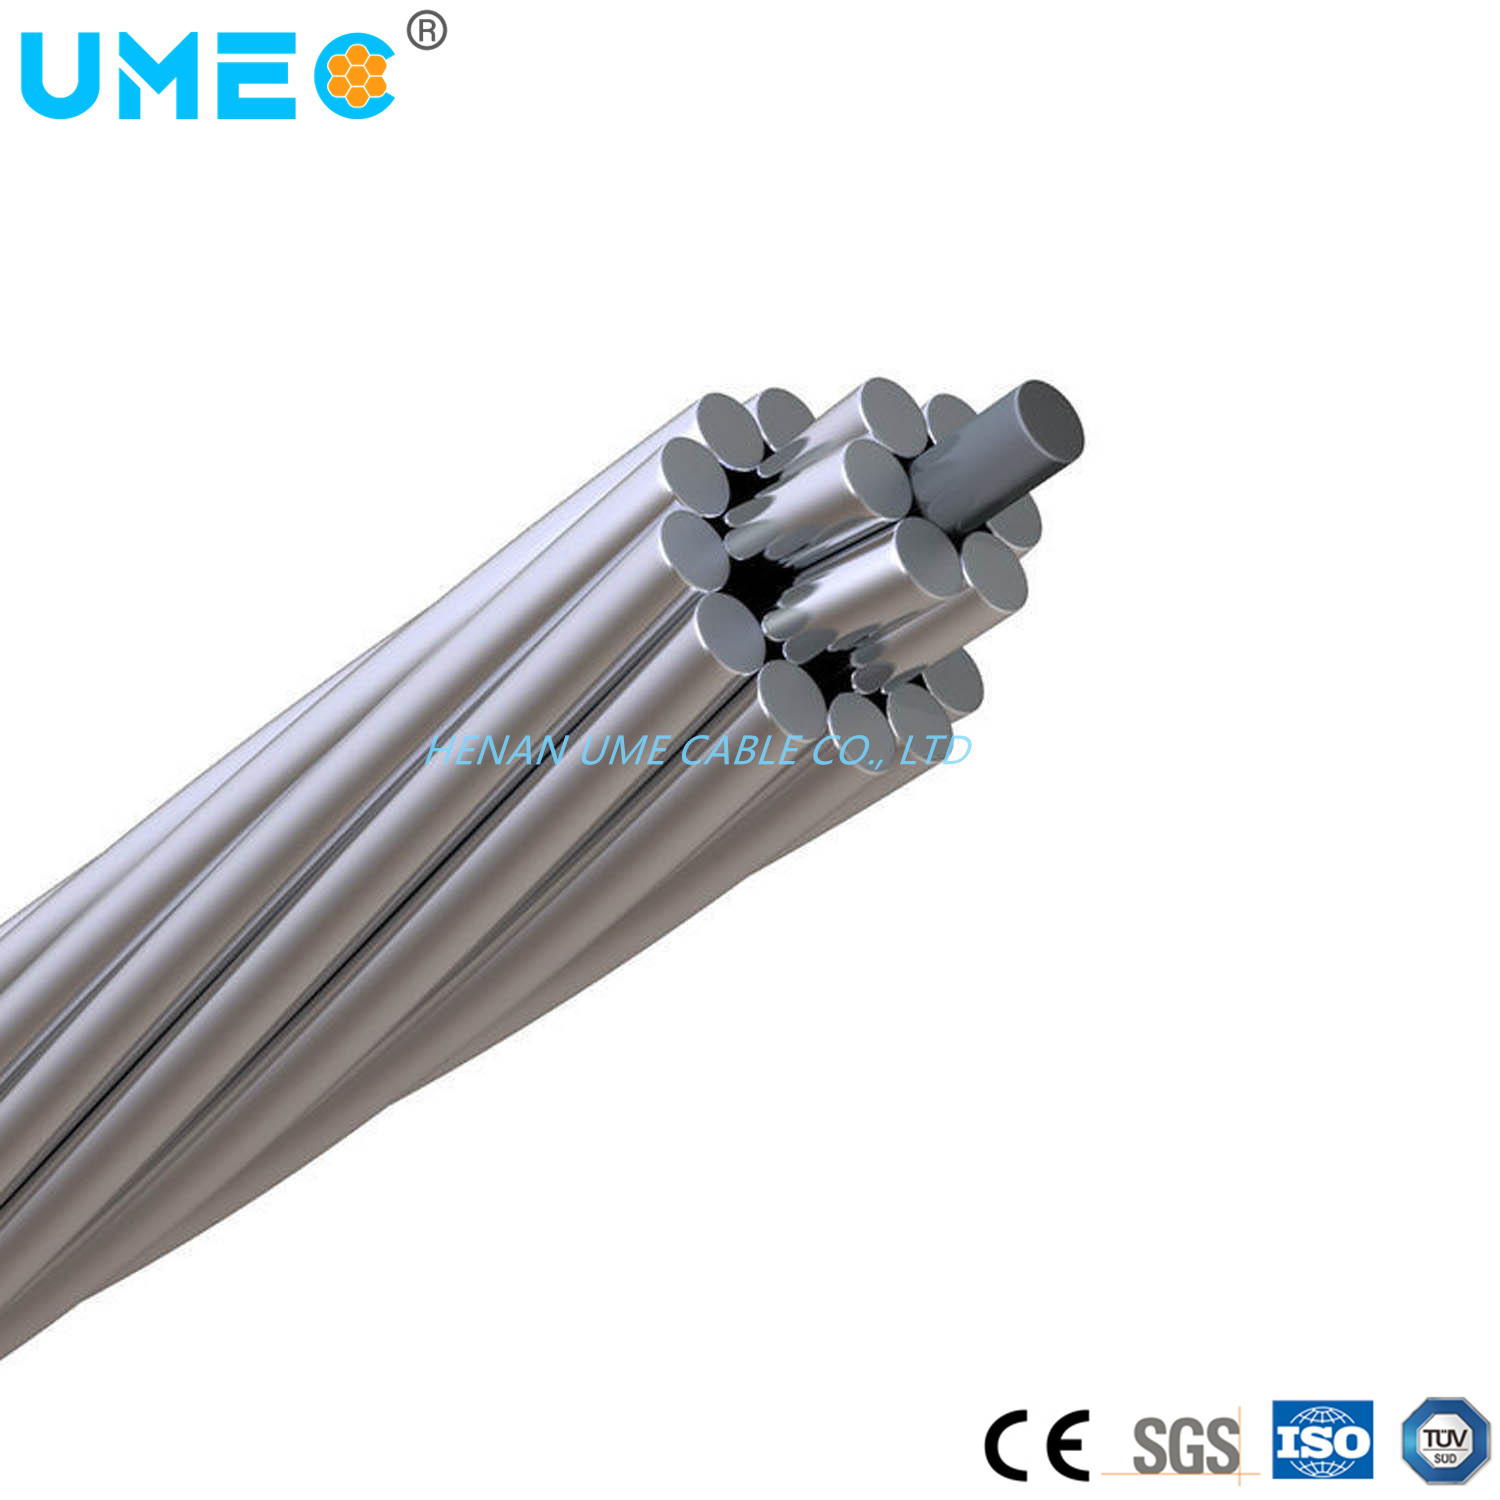 Bare Conductor Power Transmission Line Aluminum Conductor Steel Reinforced ACSR